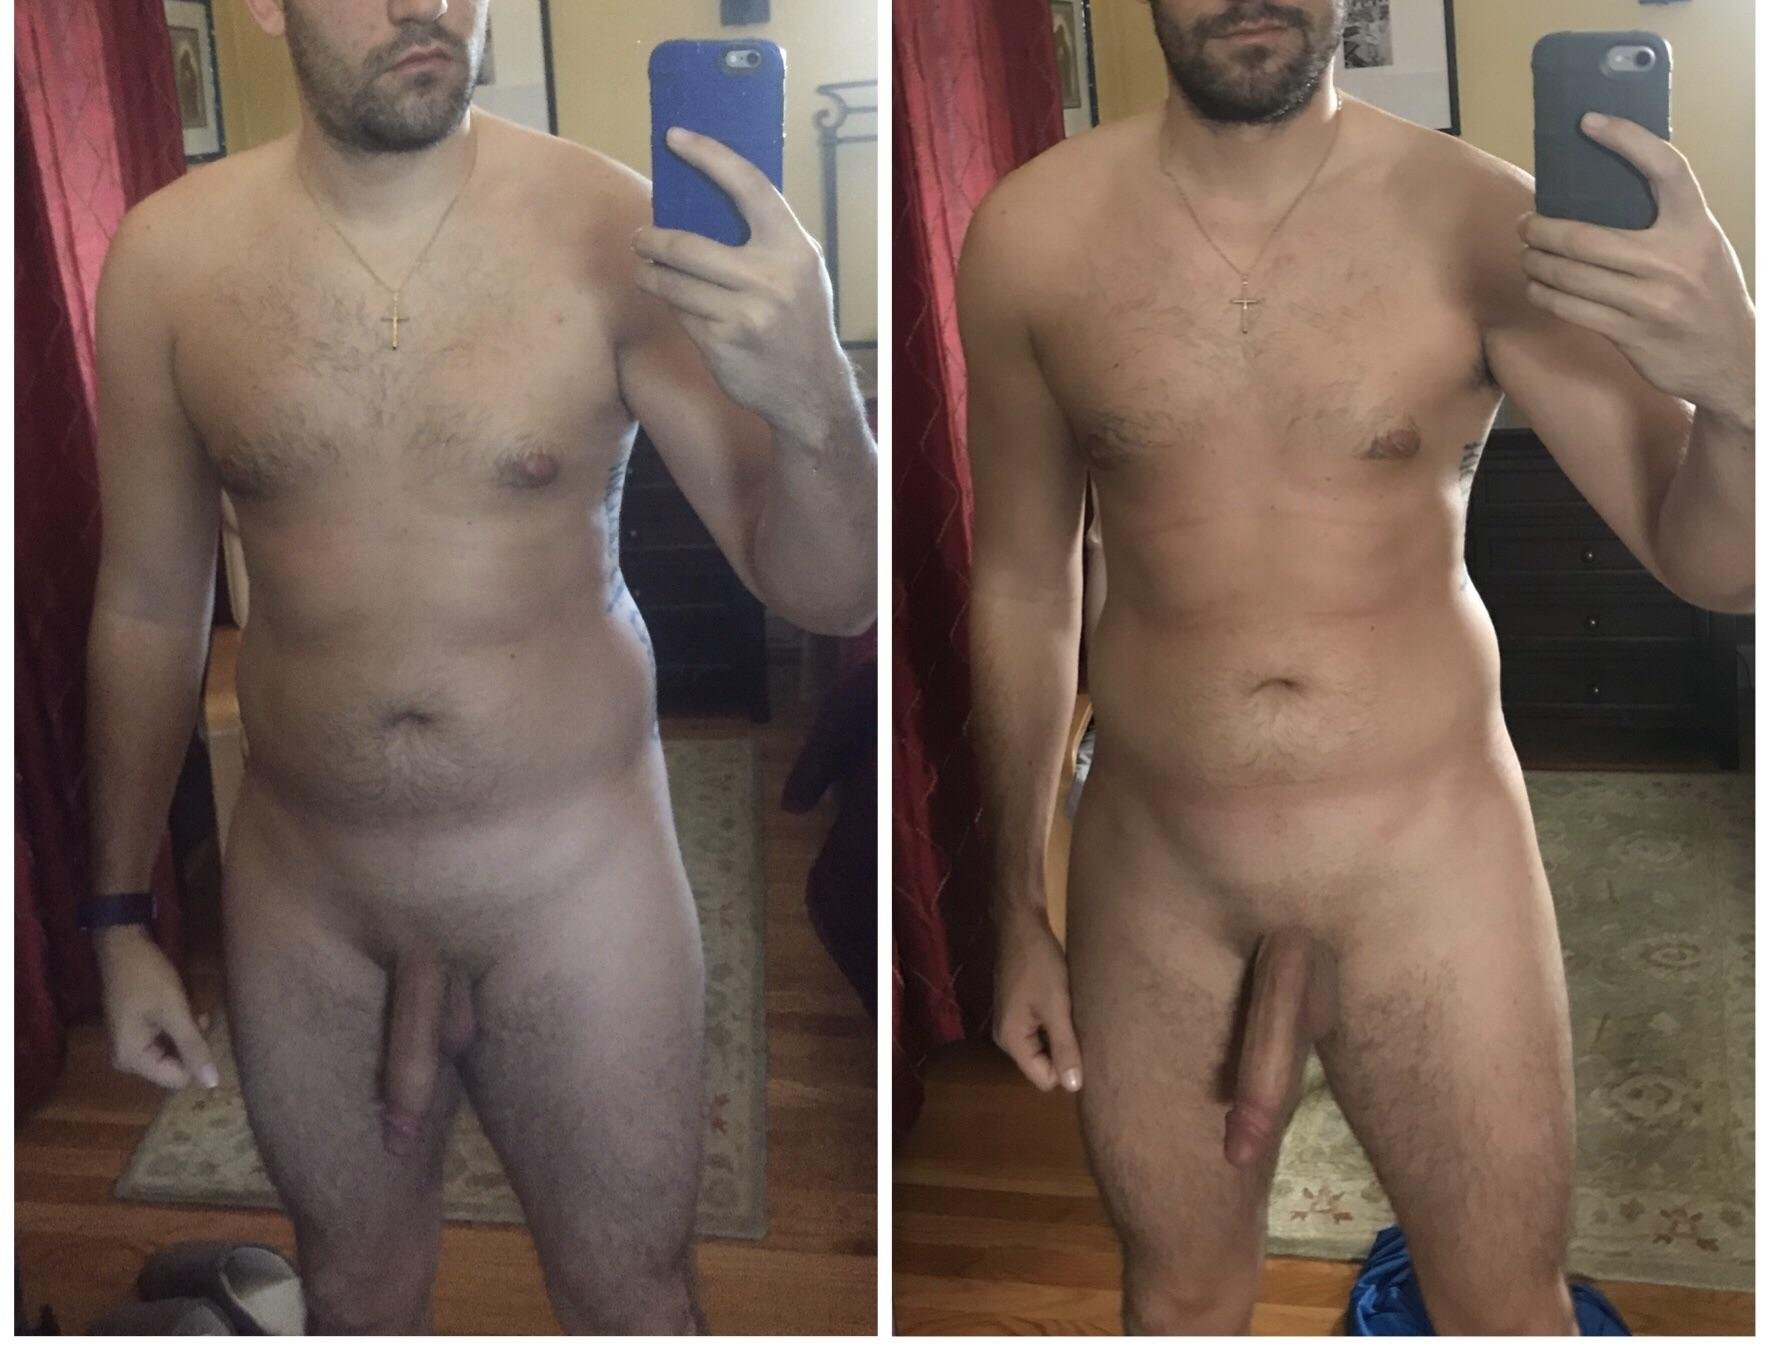 M/27/5’11” [190 down to 150 then back up to 170 with muscle trying to stay close to this weight but get more definition] How am I looking?